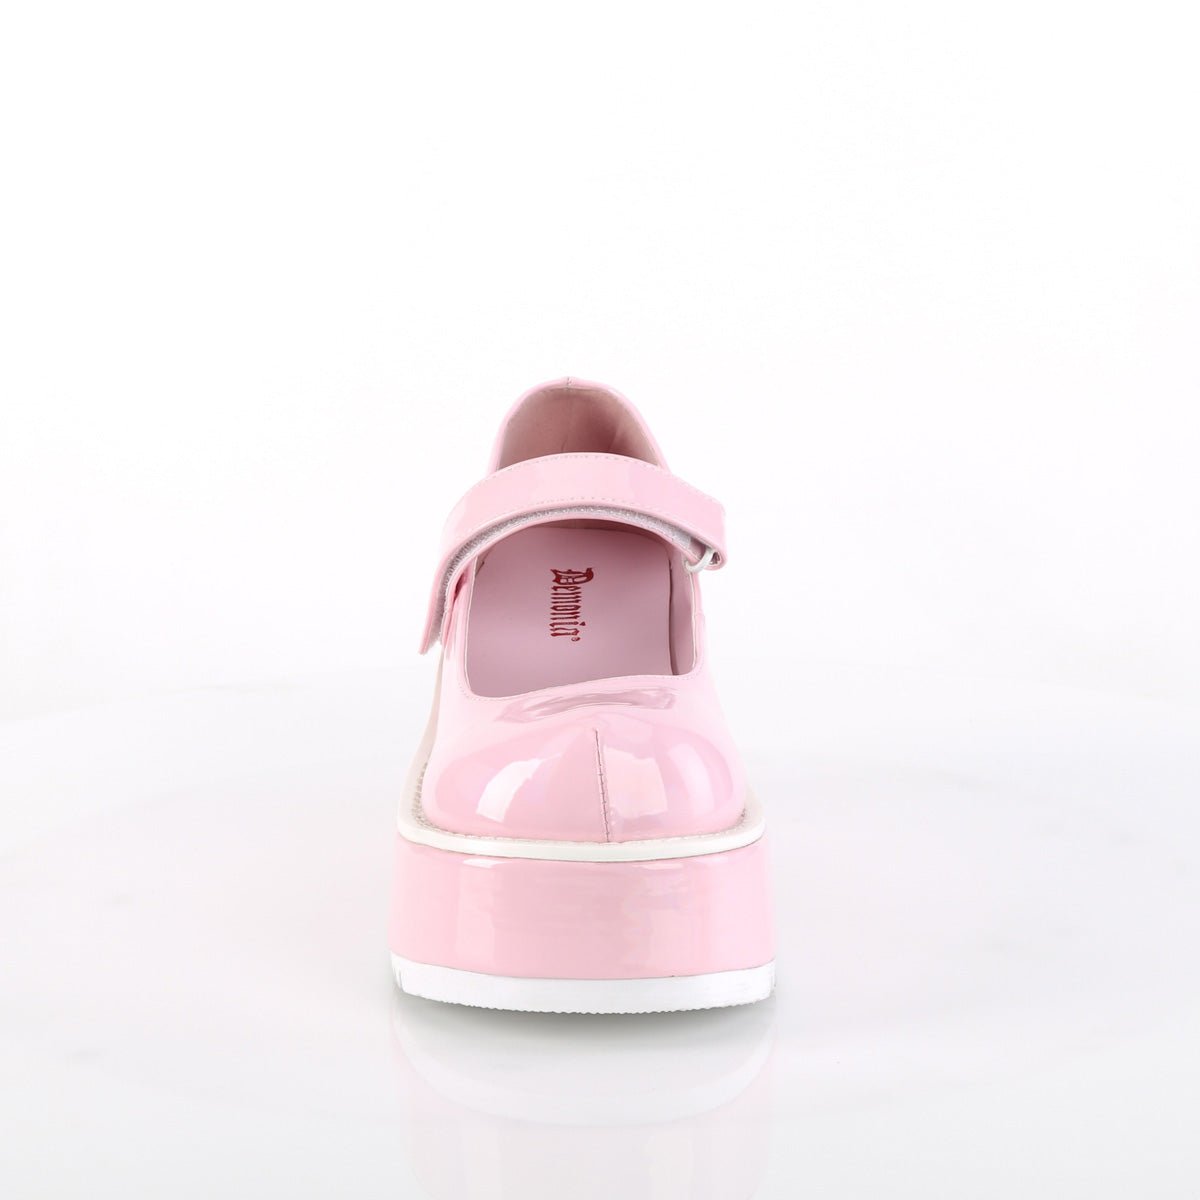 Too Fast | Demonia Dollie 01 | Baby Pink Hologram Patent Women&#39;s Mary Janes